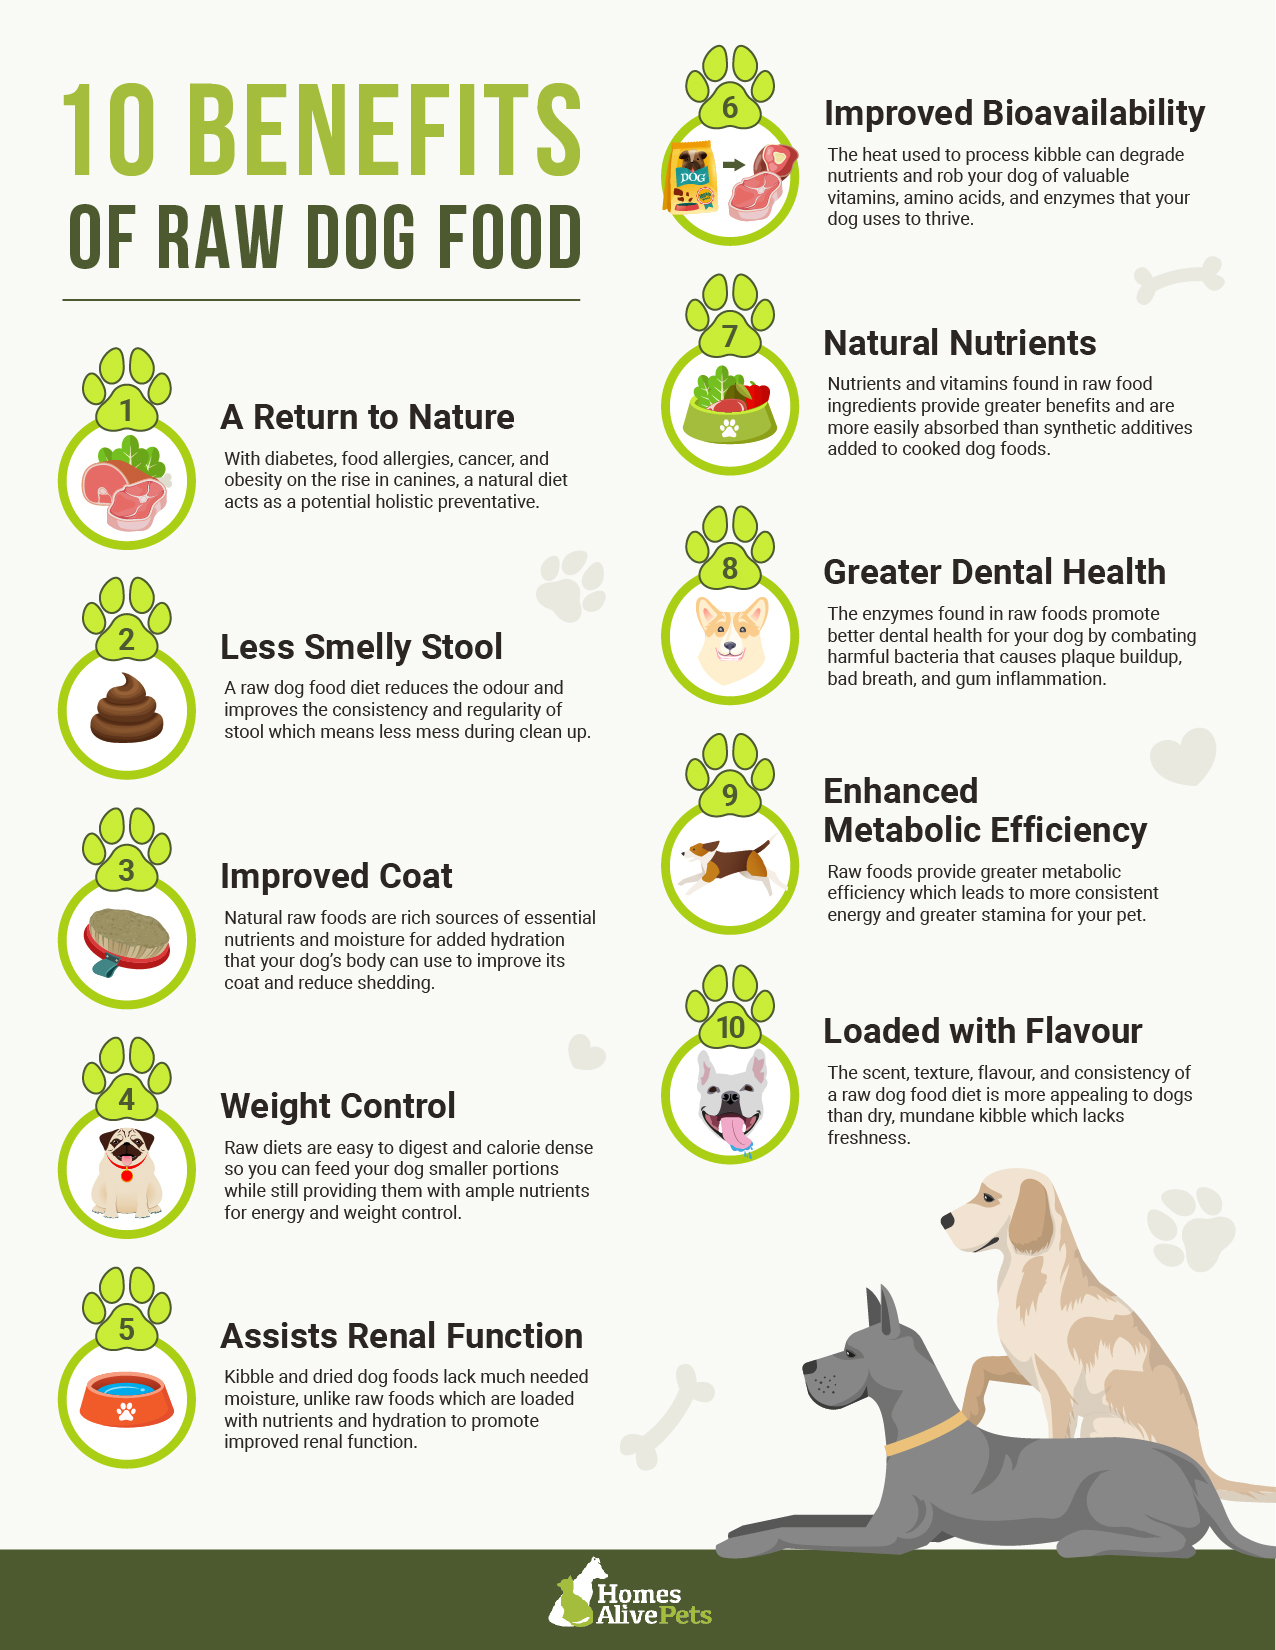 Does Raw Dog Food Help With Allergies? 2